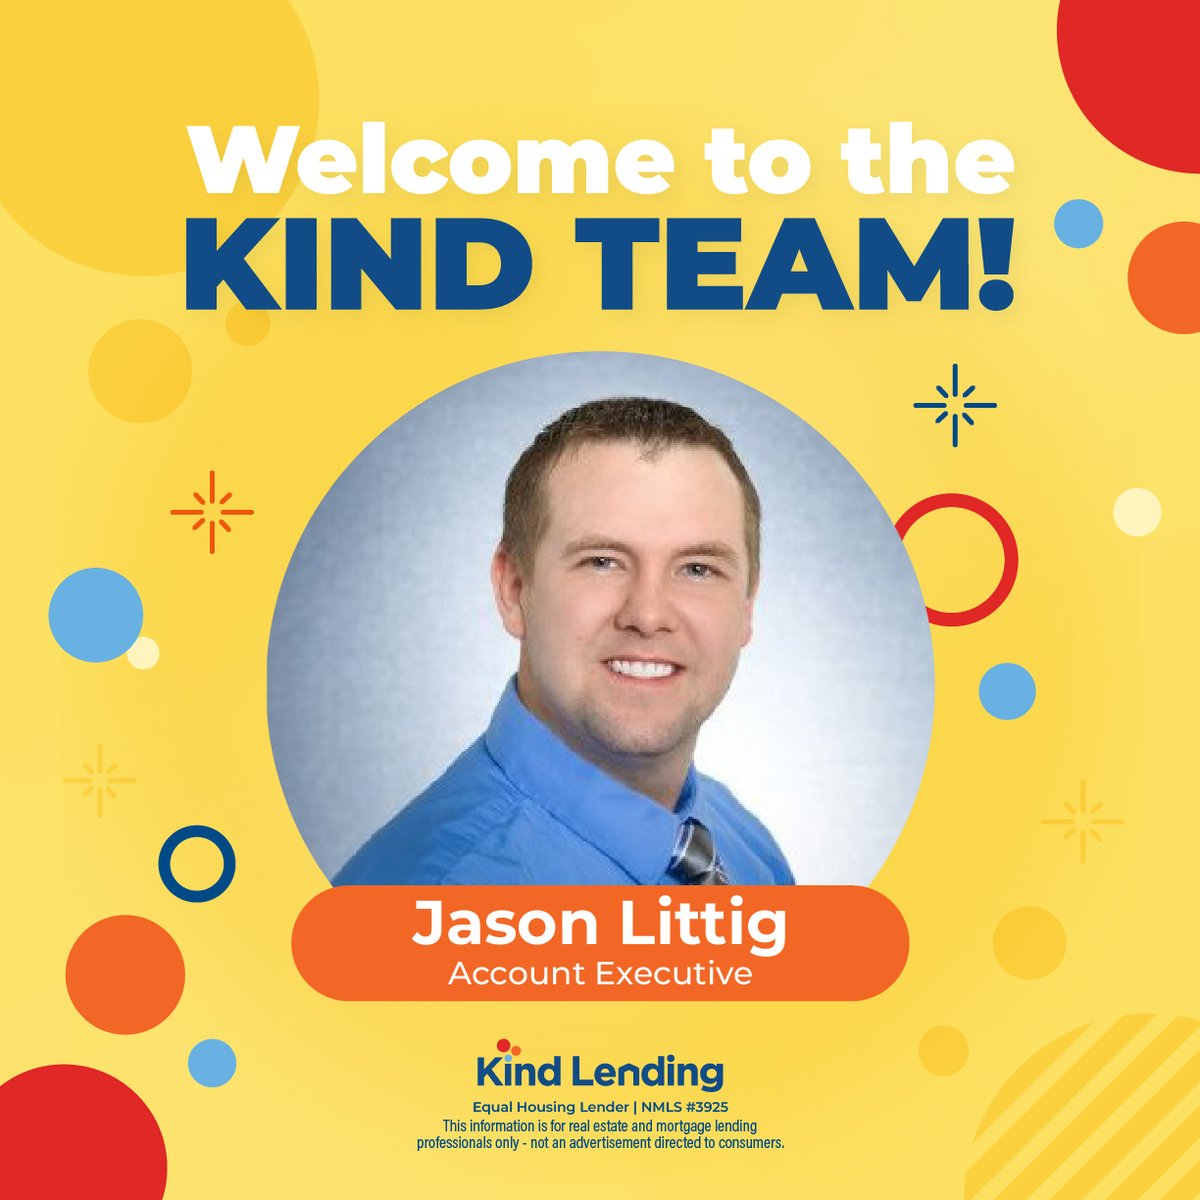 Help us welcome Jason Littig, the newest addition to Kind Lending's team as an Account Executive!

Connect with Jason by visiting his AE webpage at kindtpo.com/ae/jlittig.

#kindlending #accountexecutive #wholesale #wholesalelending #welcome #newhire #teamkind #kindambassador